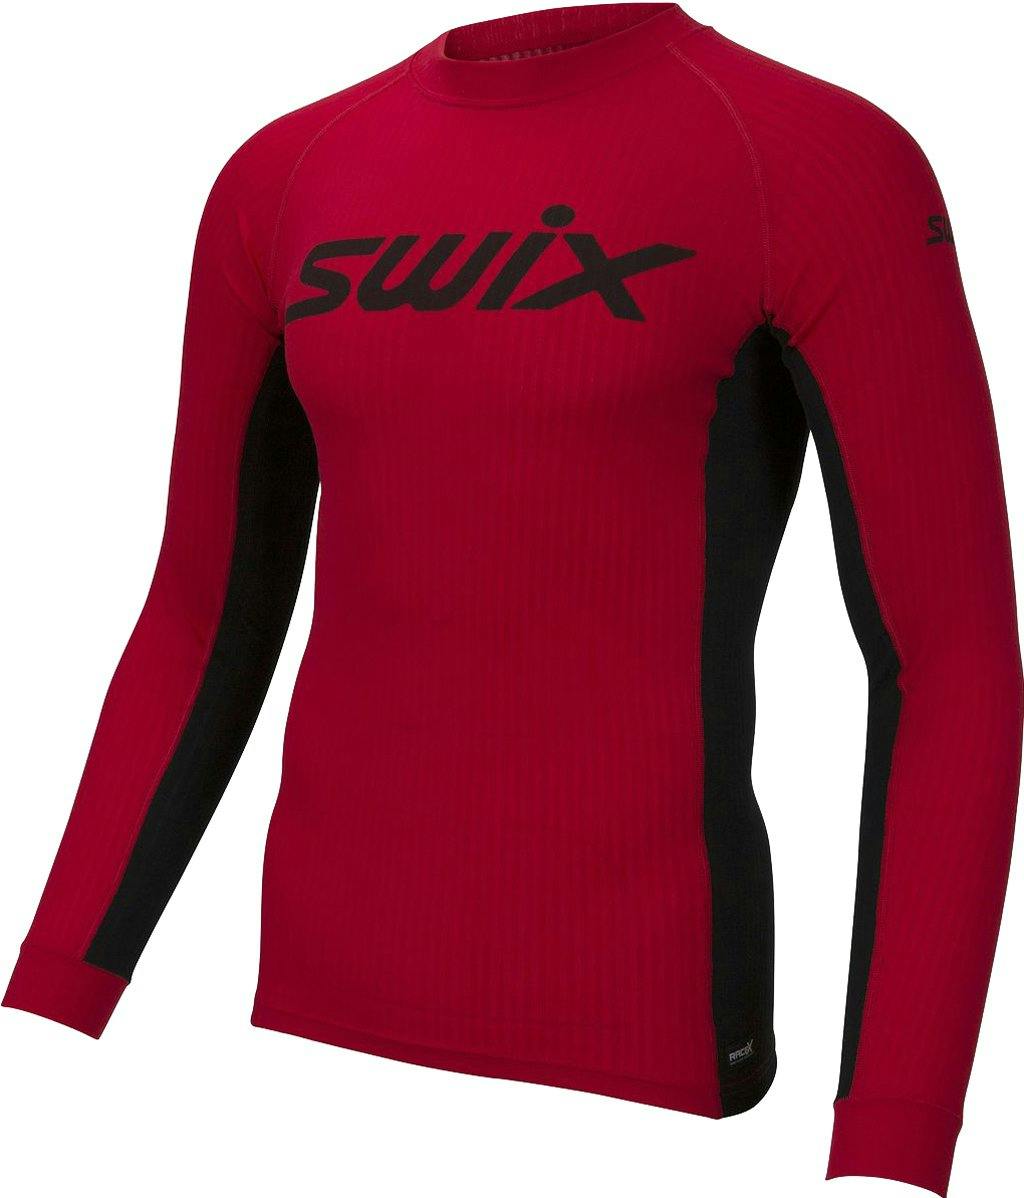 Product image for RaceX Bodywear Long Sleeve Top - Men's